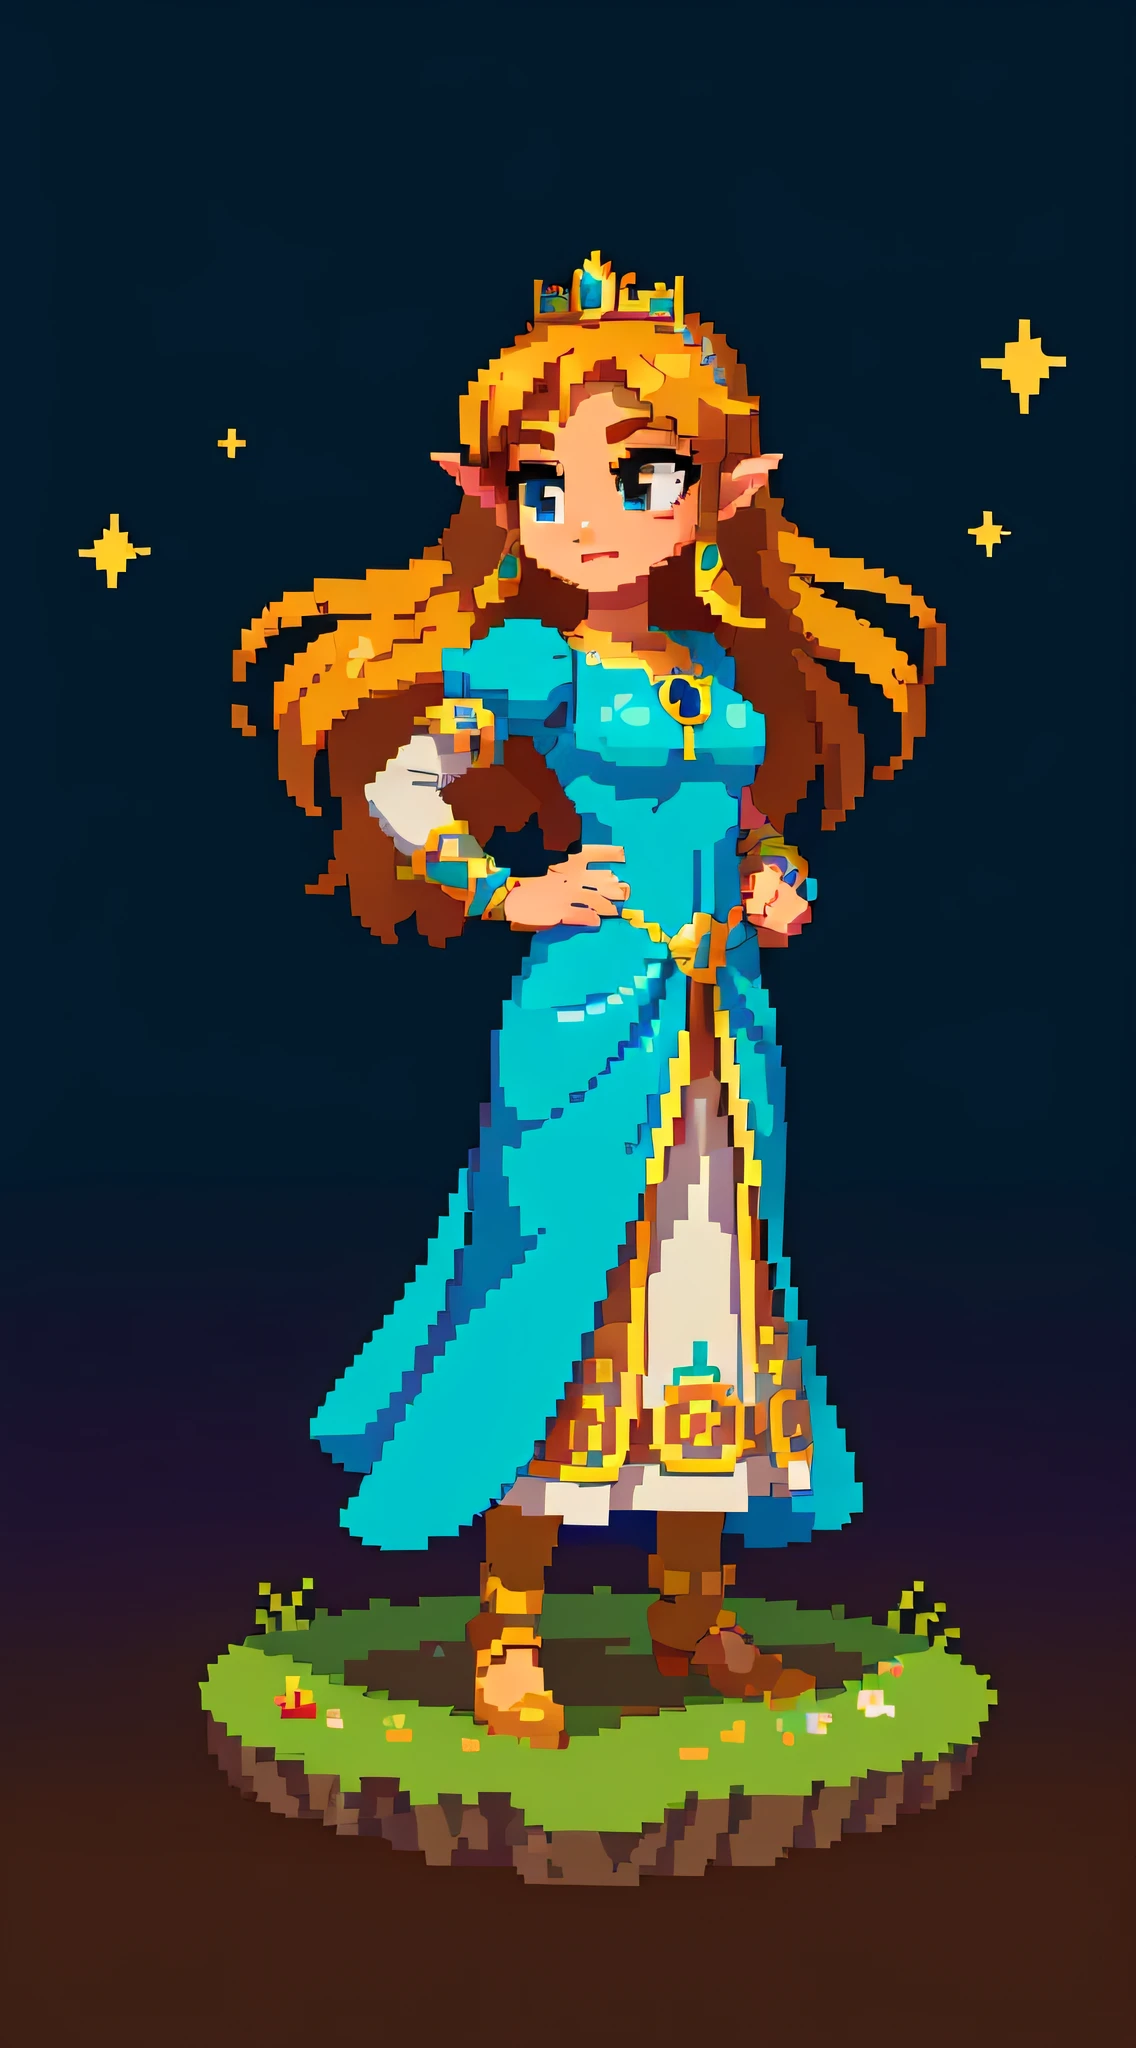 Princess Zelda portrayed in a pixel art style, standing gracefully against a simple background of a starry night, her iconic dress and tiara shining with vibrant pixel colors, evoking a nostalgic sense of classic video game aesthetics, Pixel Art, created with Piskel